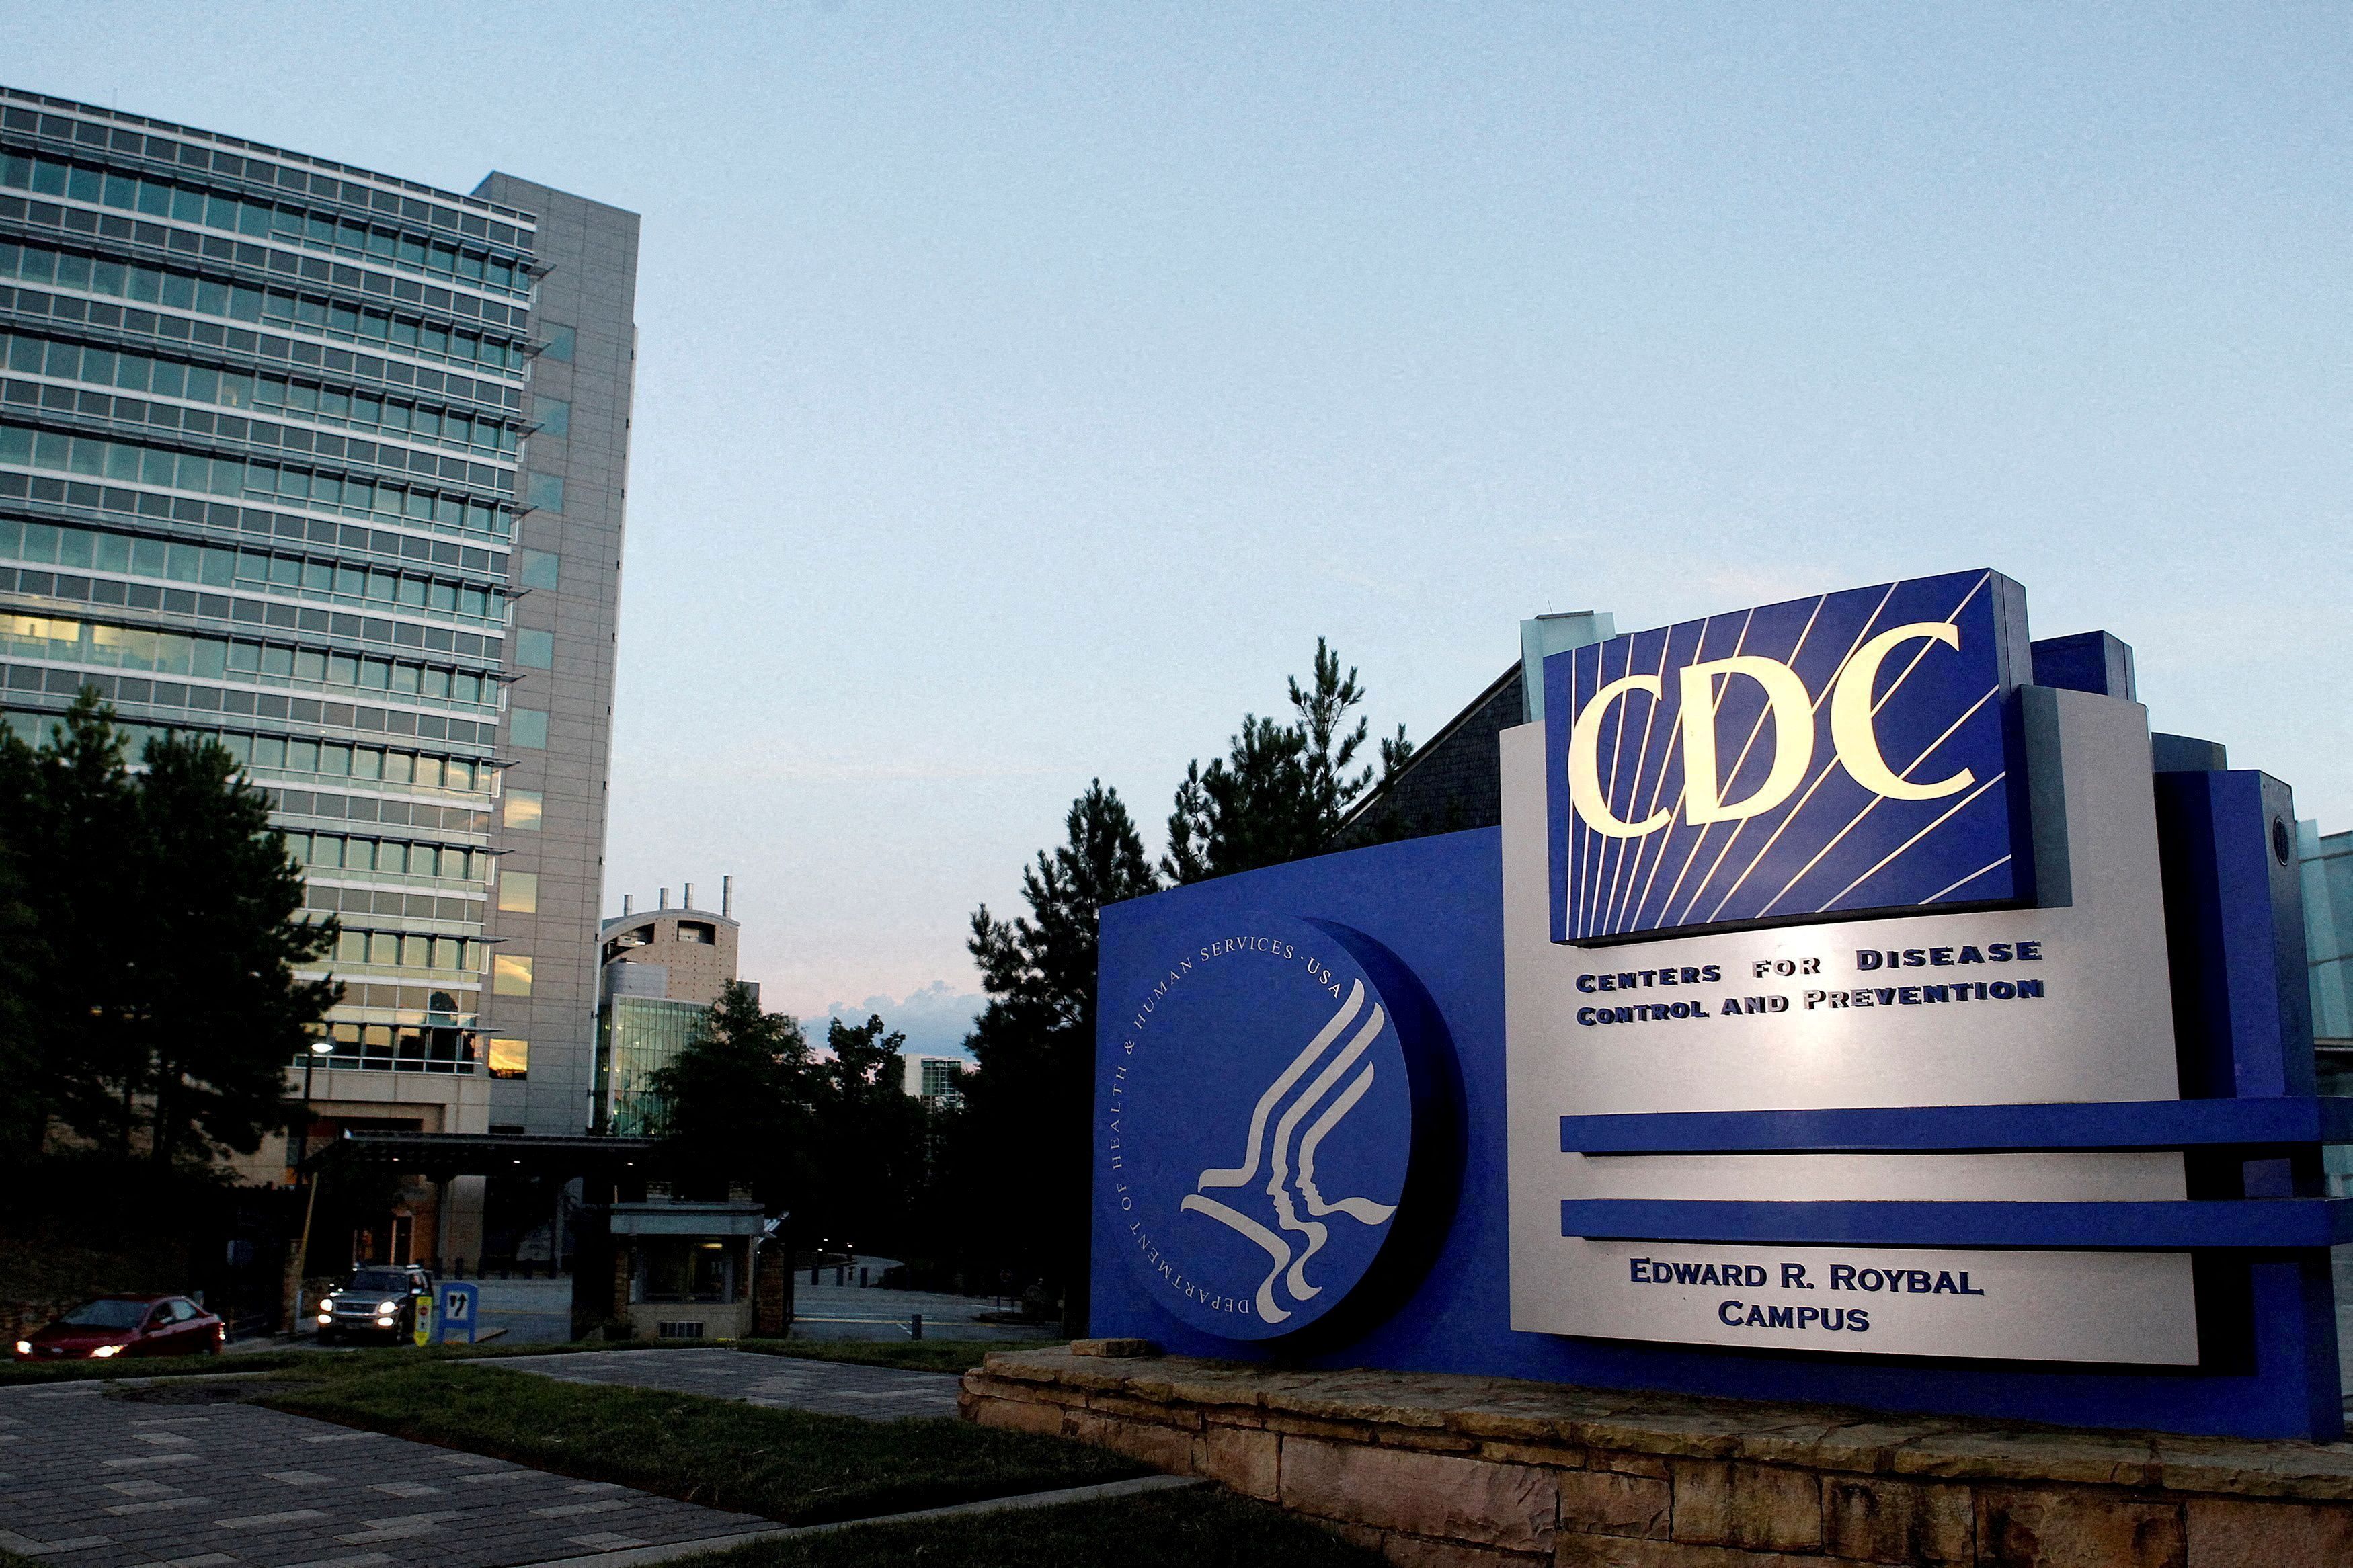 U.S. CDC Removes Mask Recommendation from Monkeypox Travel Notice to Avoid “Confusion”